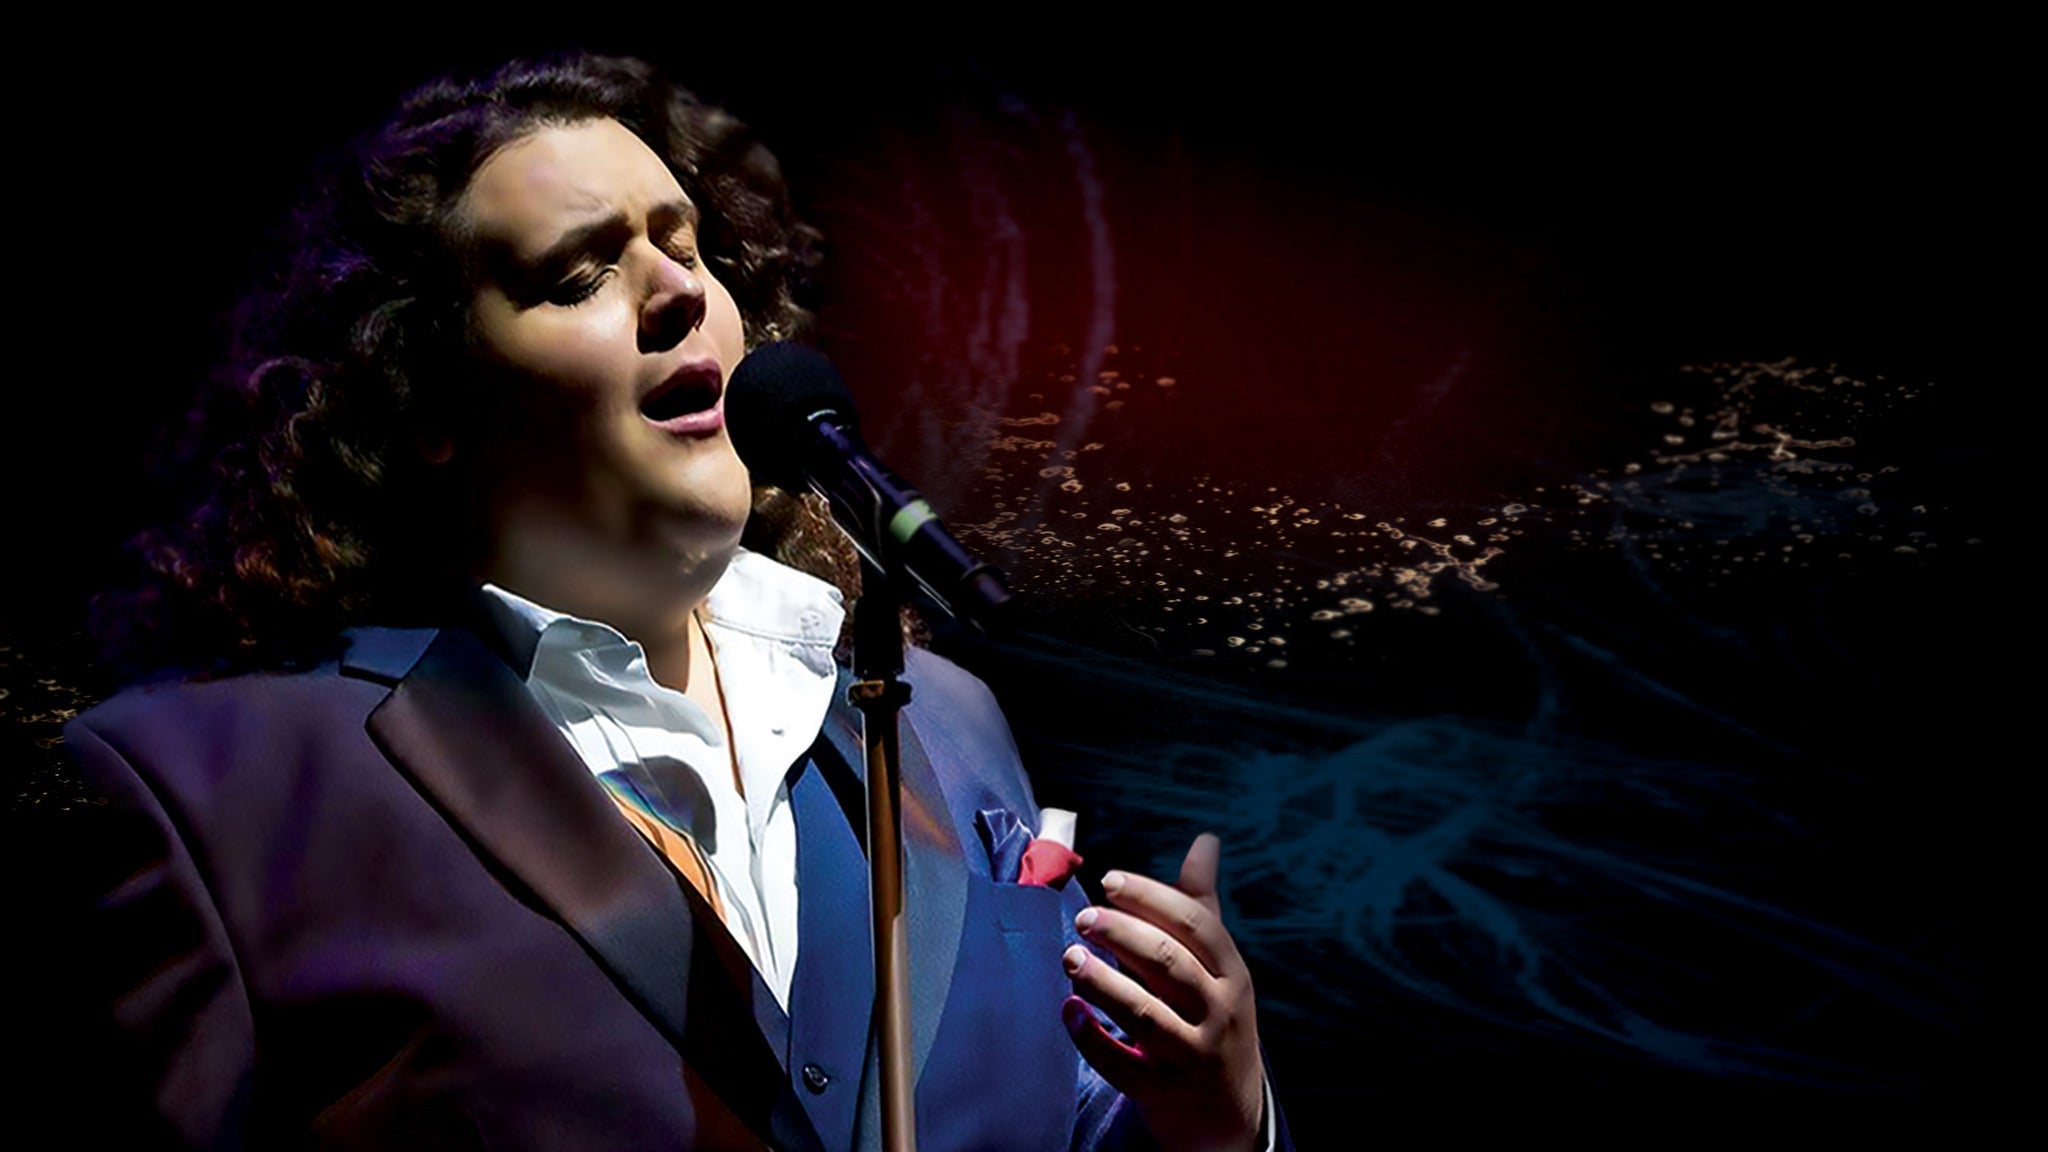 Jonathan Antoine in Thousand Oaks promo photo for Exclusive presale offer code